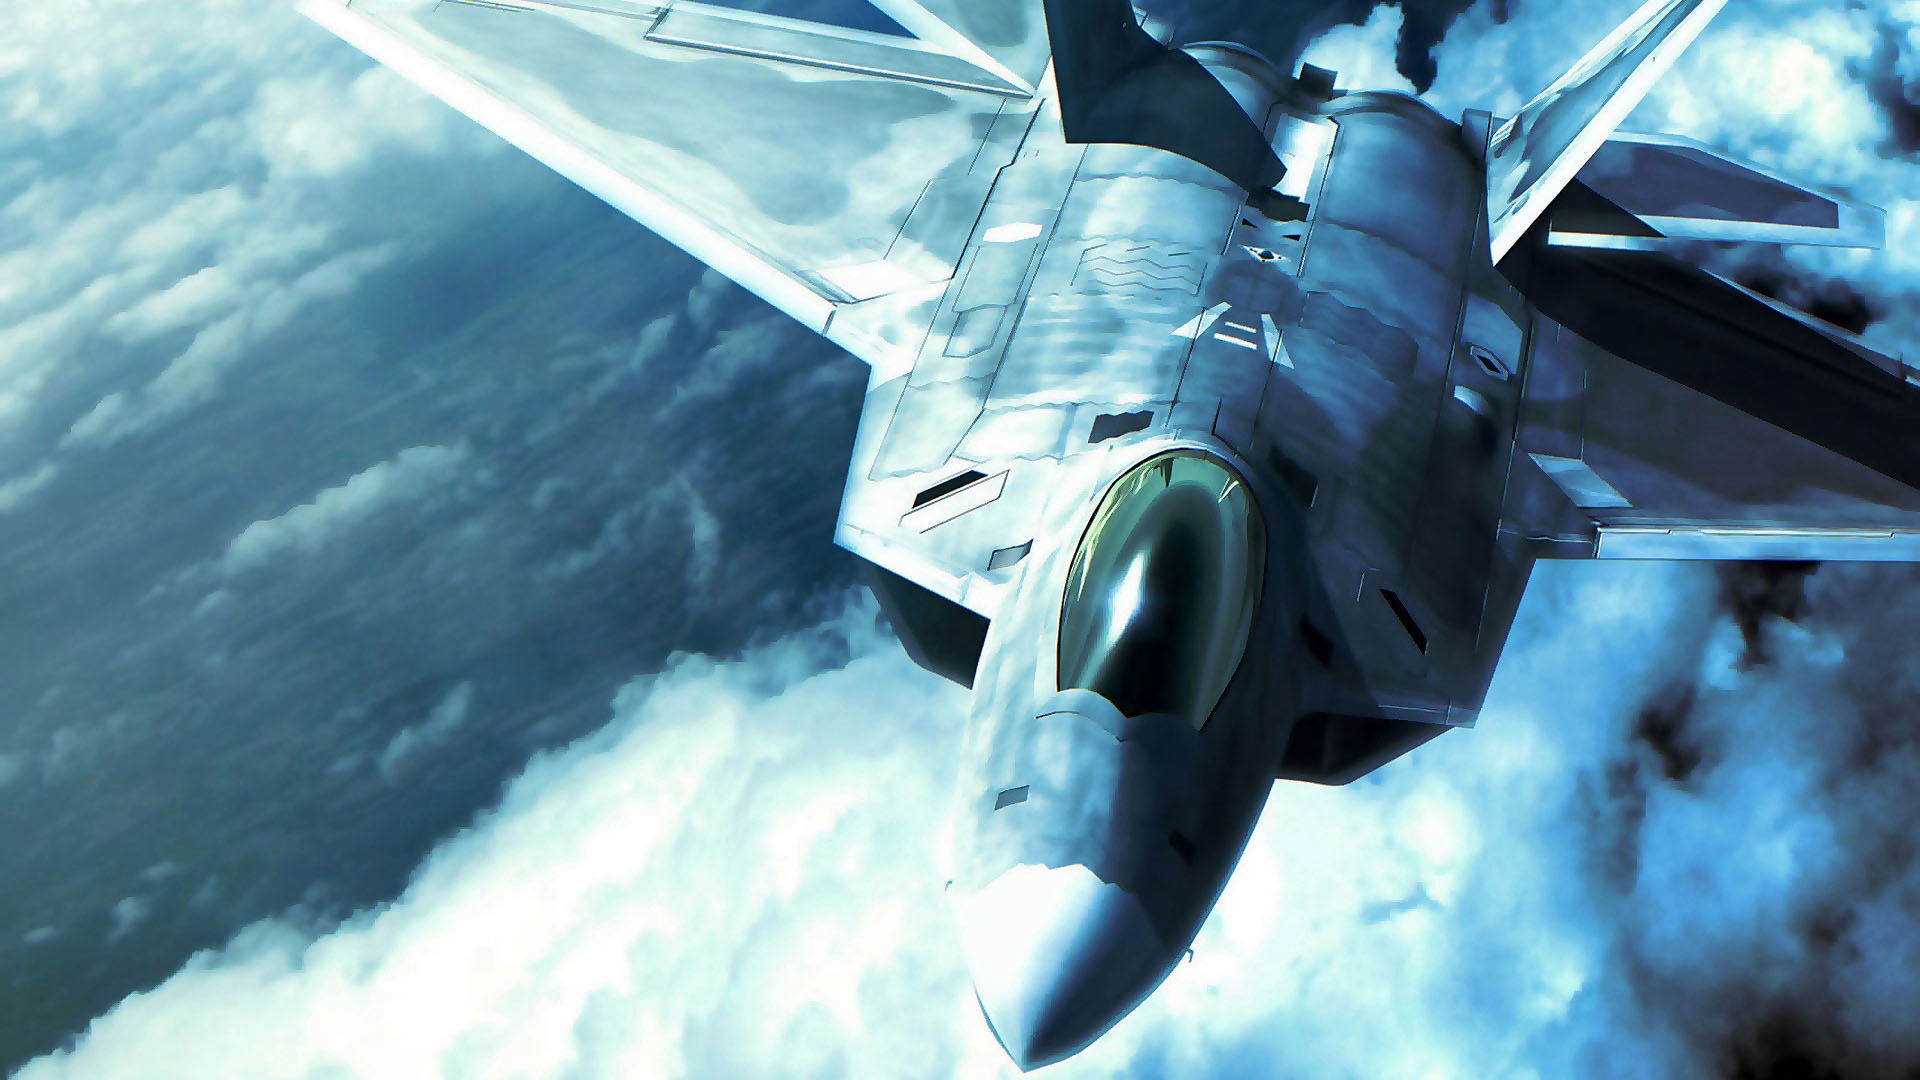 If You Enjoyed This F22 Wallpaper Take A Look Around The Rest Of